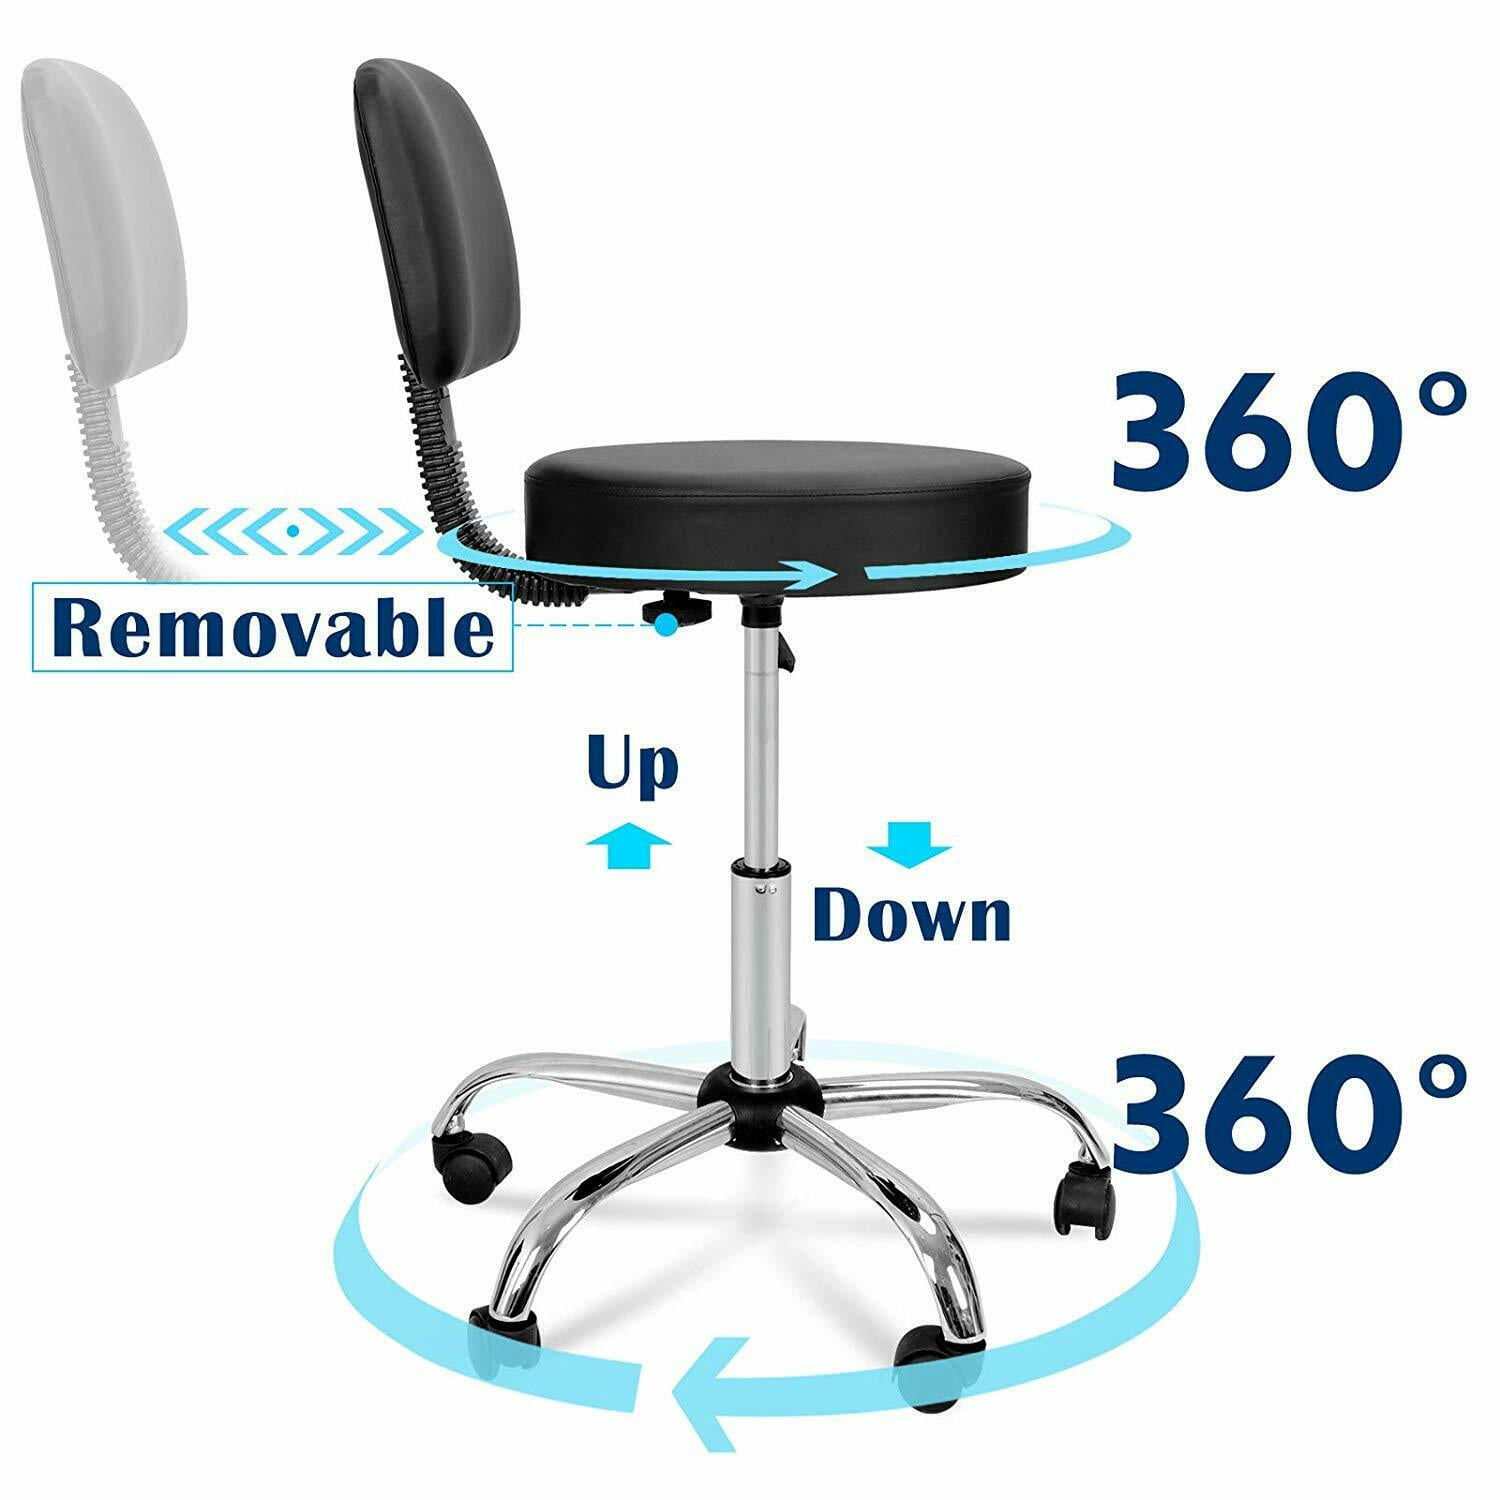 Hydraulic Rolling Stool Desk Chair Drafting Adjustable with Backrest Heavy Duty for Office Kitchen Medical Dentist Shop and Home Black 